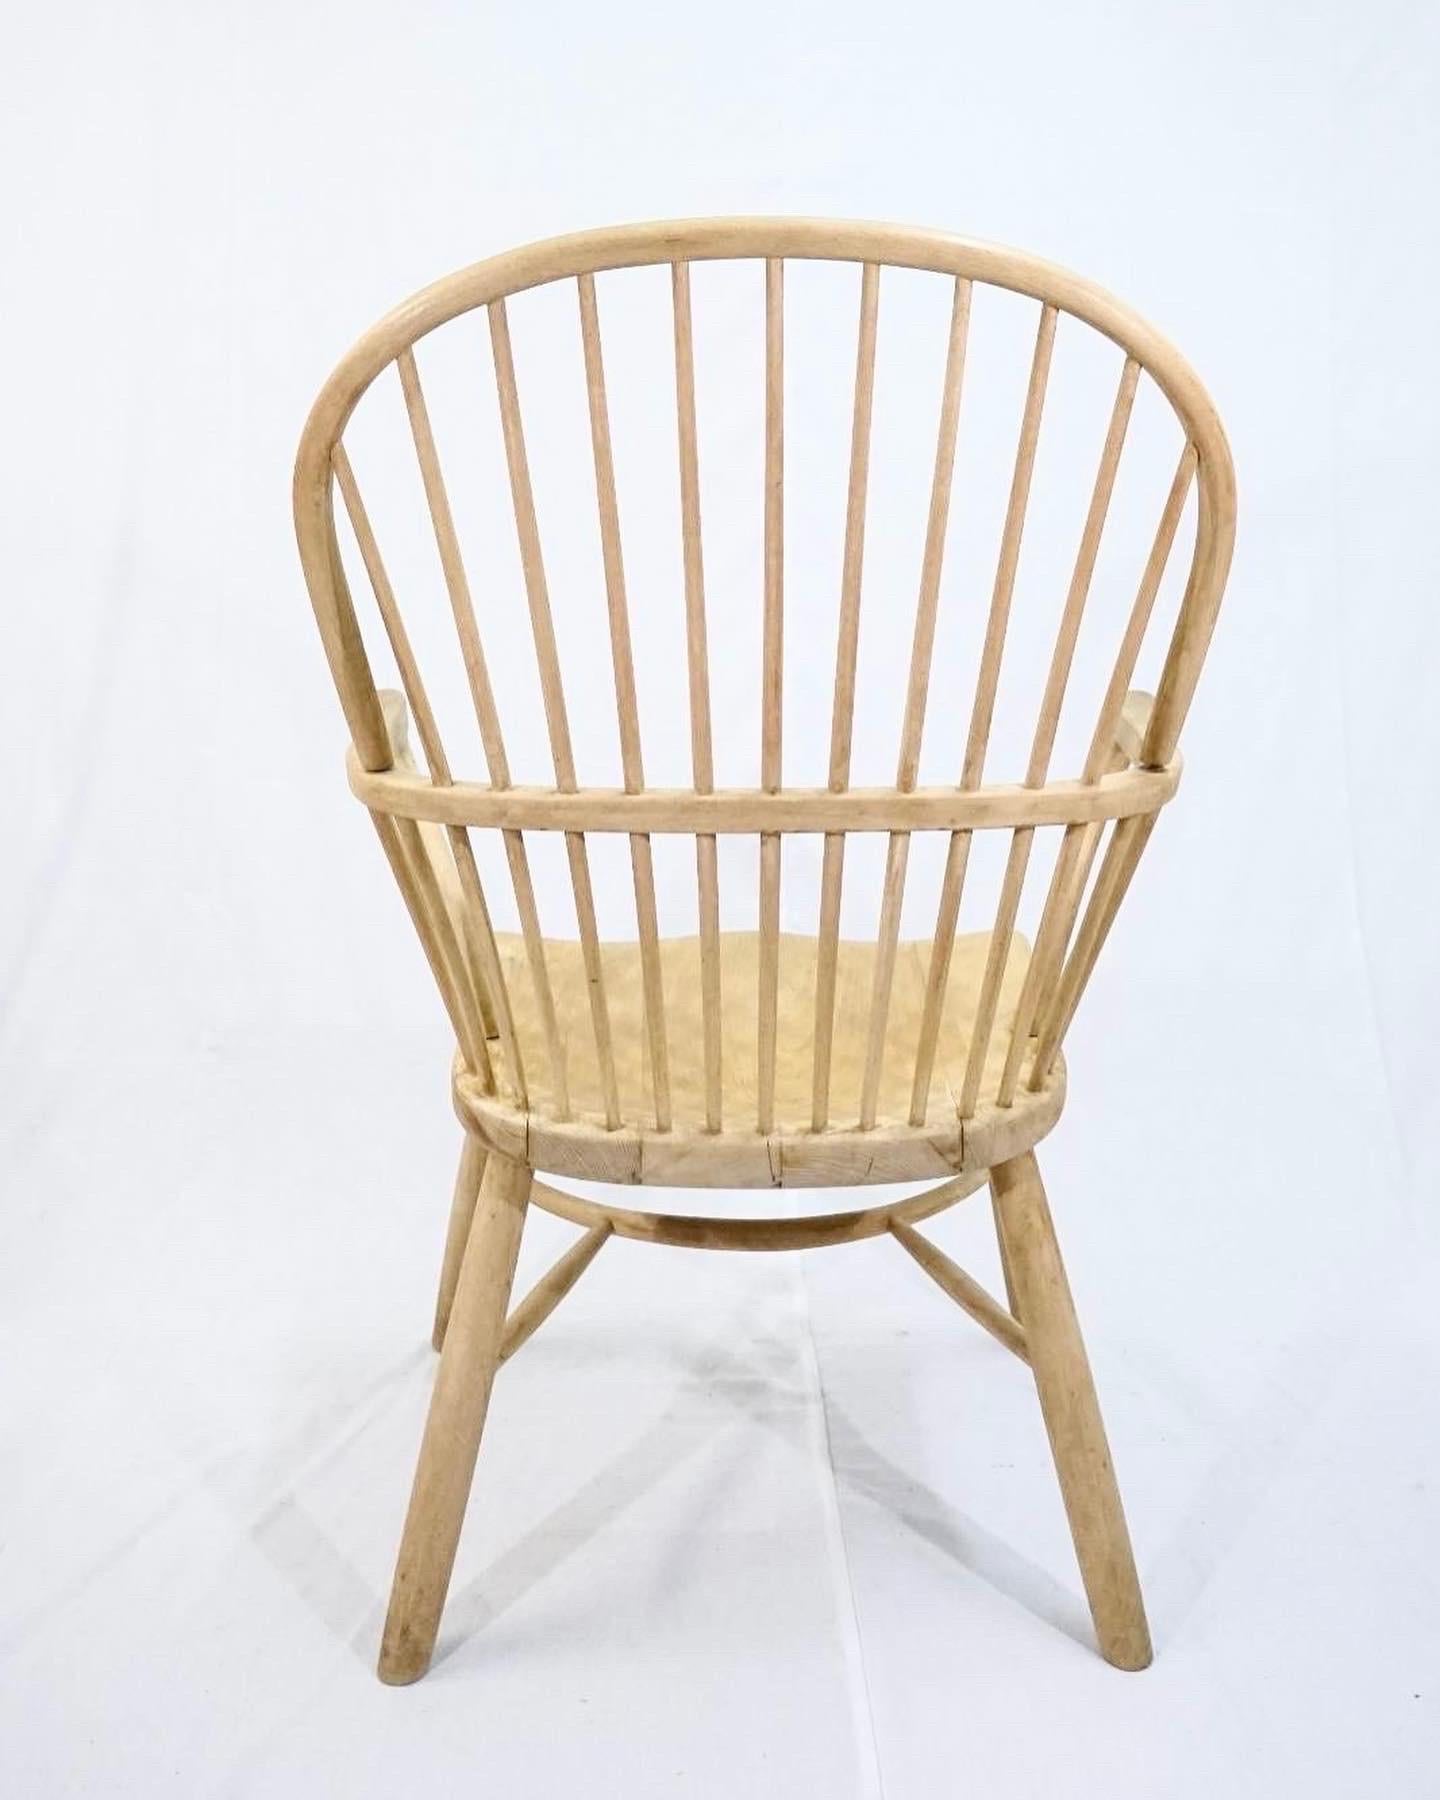 Oiled Palle Suenson Windsor Chair in Solid Beech Wood Produced by Fritz Hansen